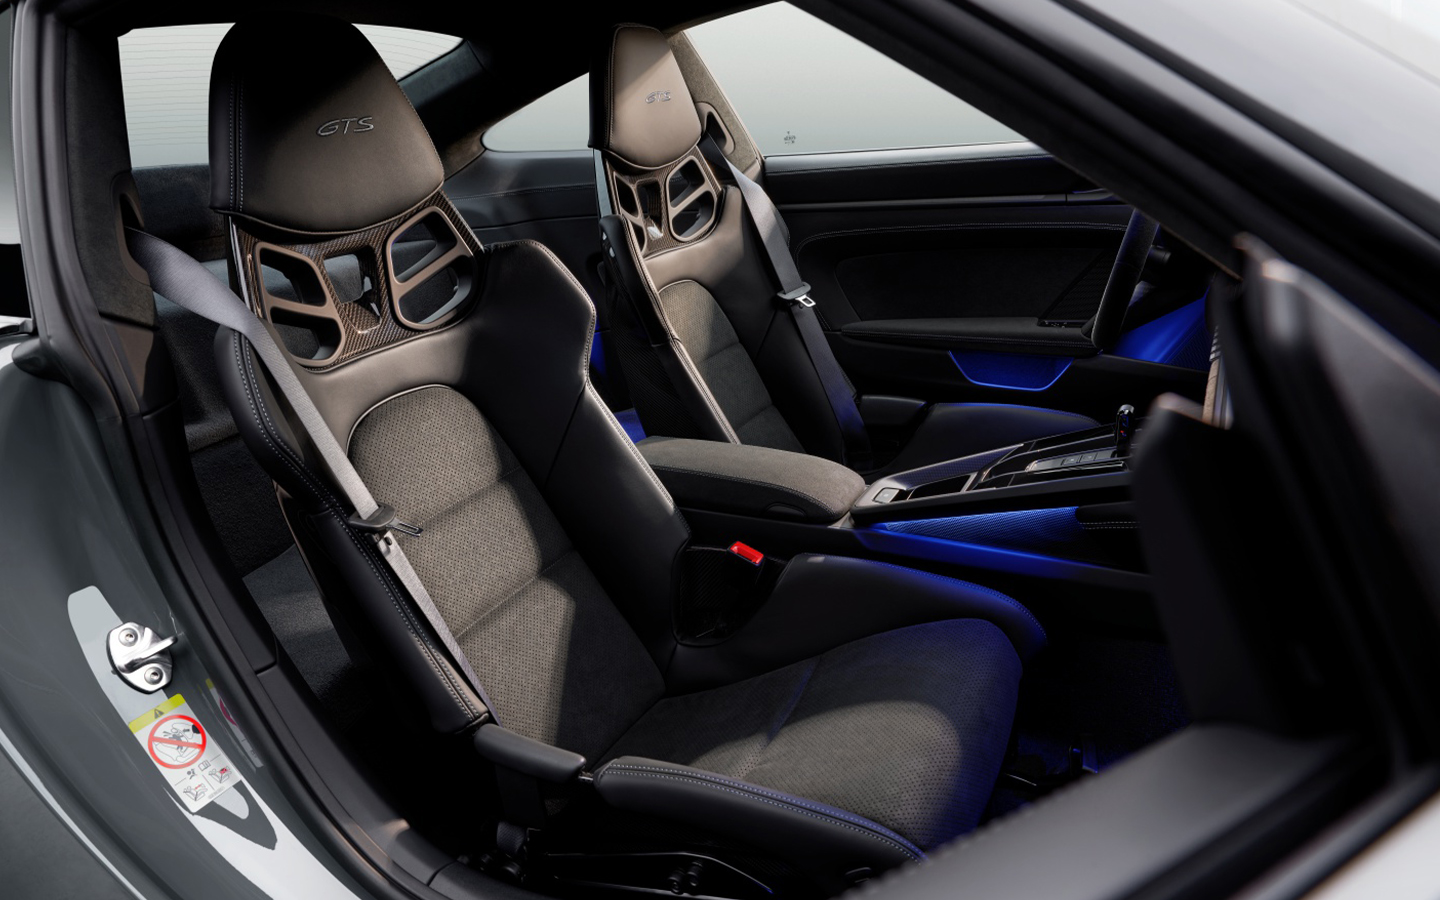 Interior of Porsche 911 Carrera GTS (992.2) showing two-seat configuration